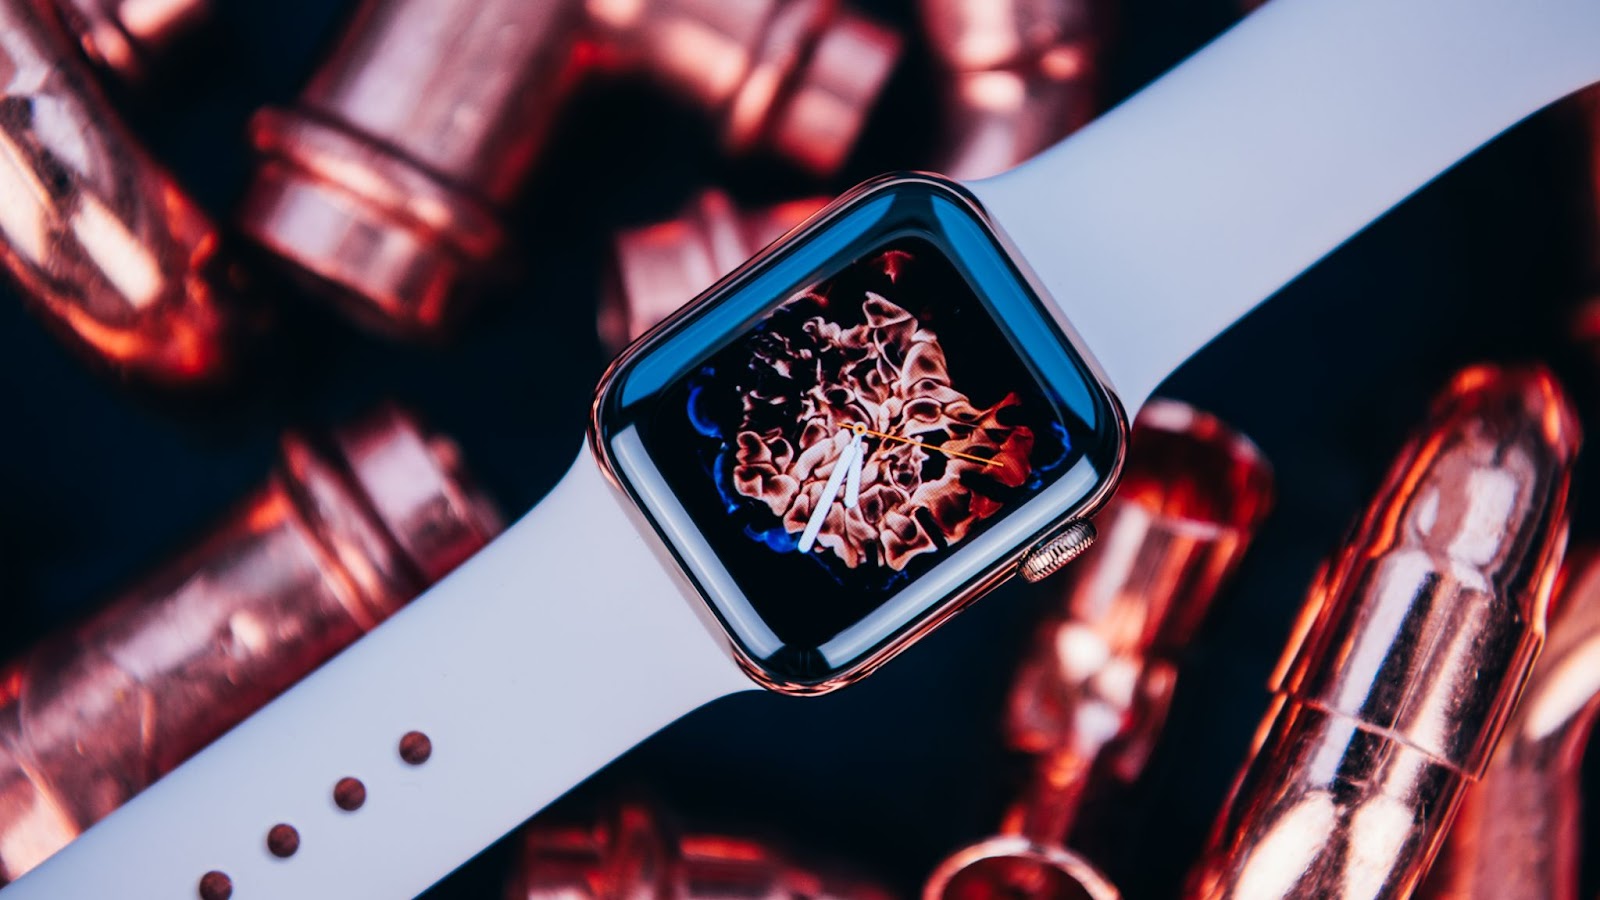 The Release Date of The Apple Watch Series 4